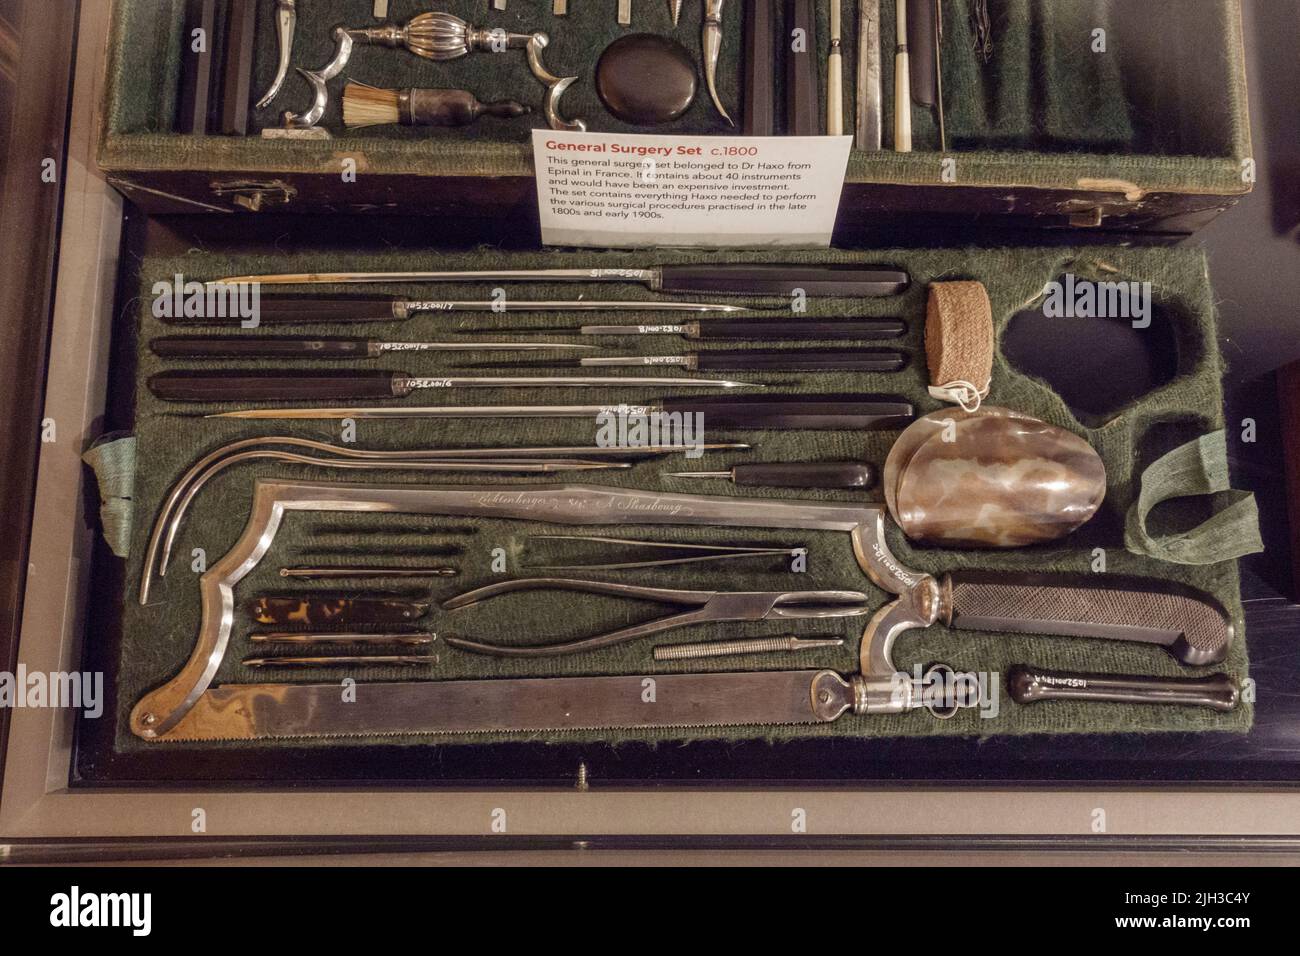 A pre-Victroian (c 1800) general surgery set belonging to Dr Haxo from Epinal in France on display in the Thackray Museum of Medicine, Leeds, UK. Stock Photo